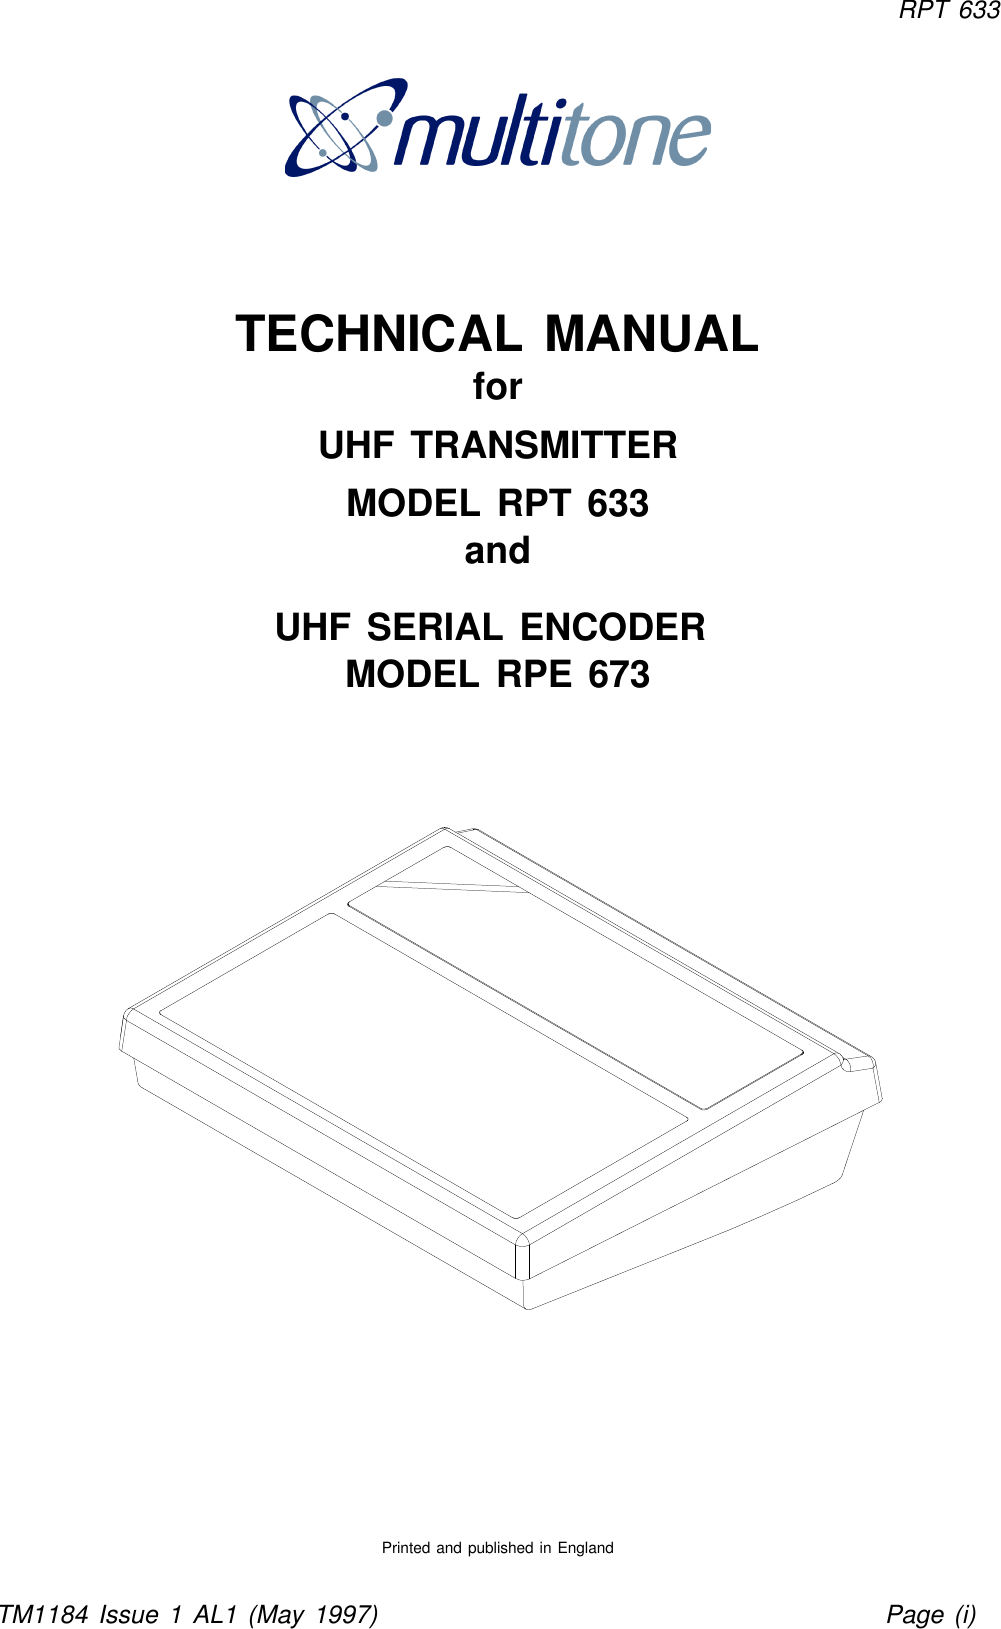 RPT 633TM1184 Issue 1 AL1 (May 1997) Page (i)TECHNICAL MANUALforUHF TRANSMITTERMODEL RPT 633andUHF SERIAL ENCODER MODEL RPE 673Printed and published in England